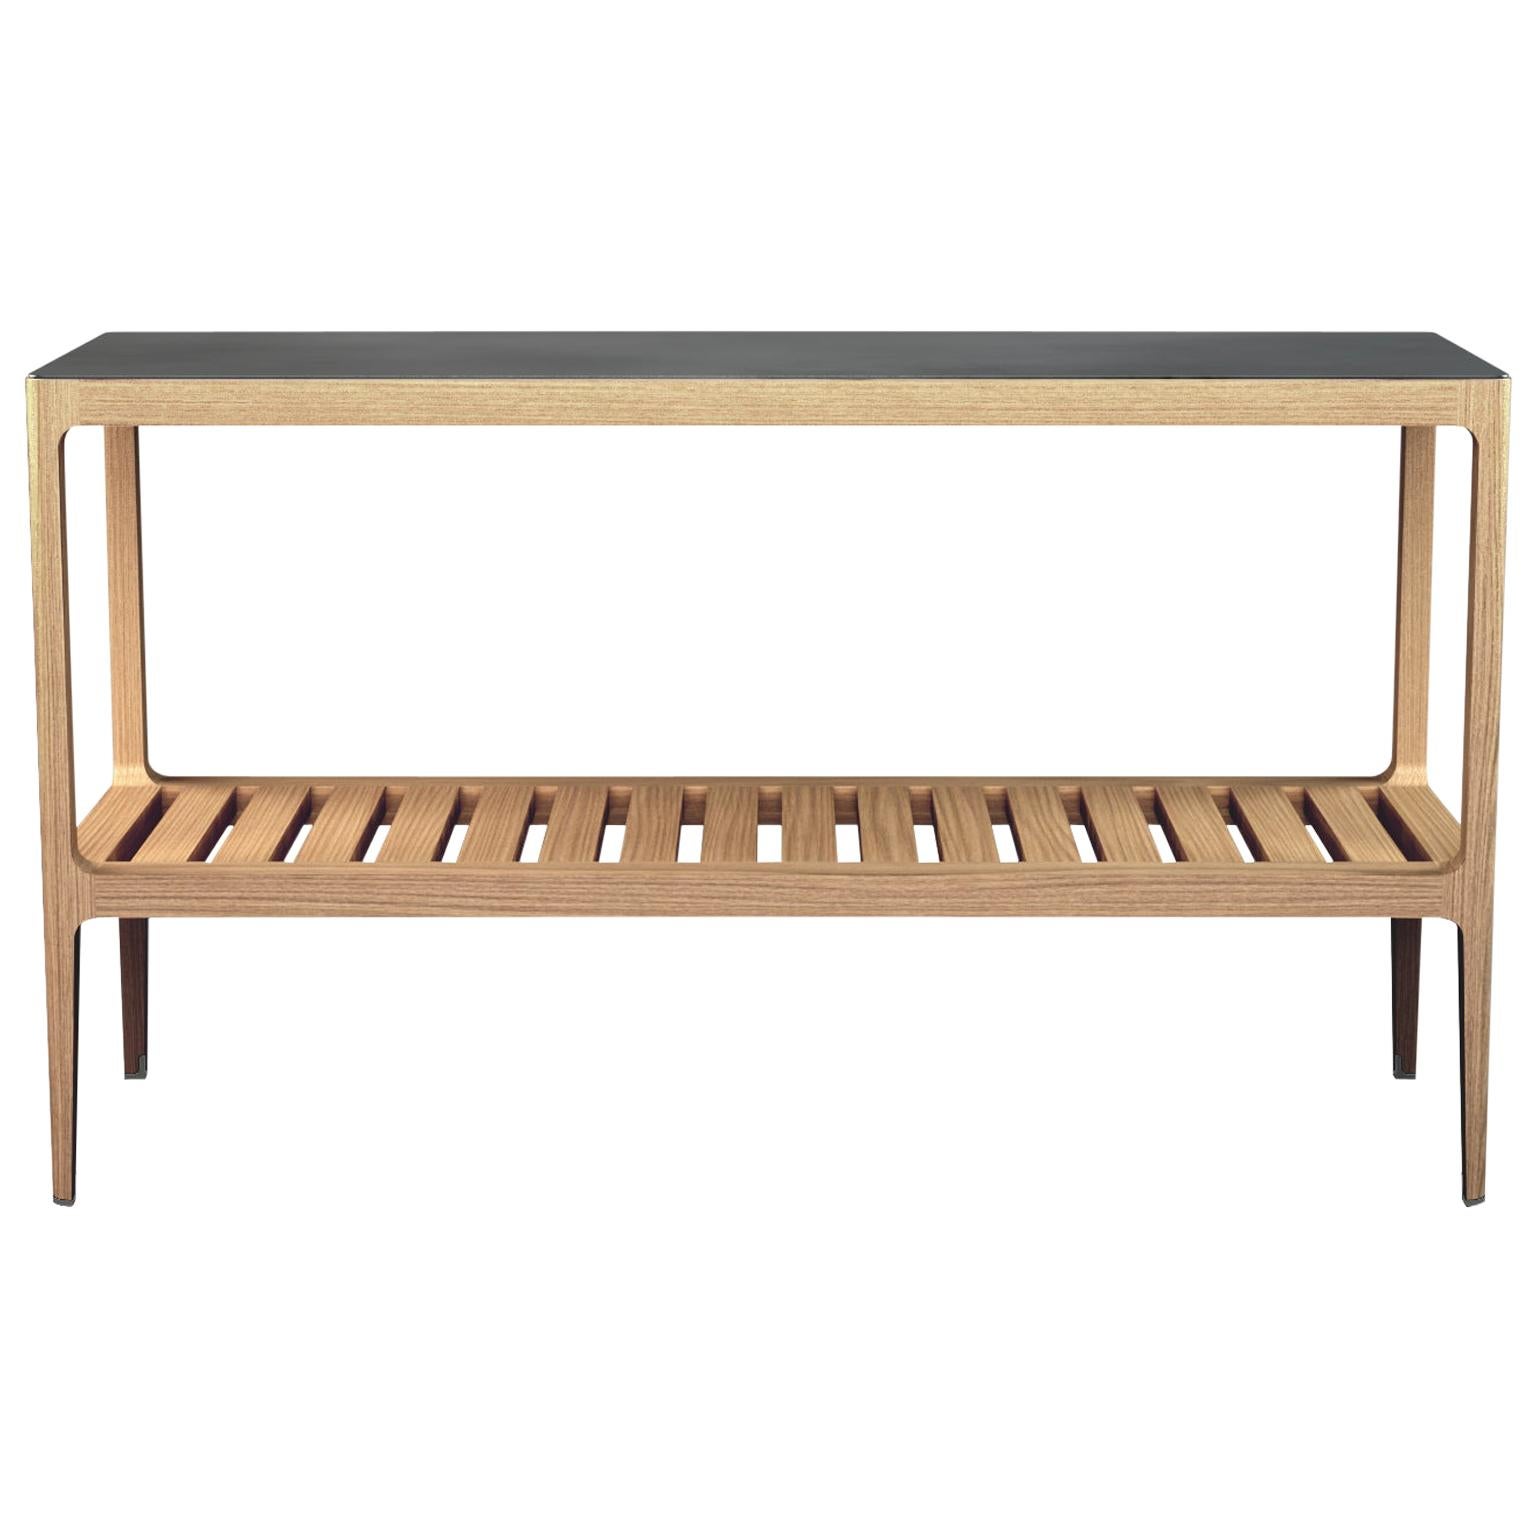 Customizable Oak Console Table with Silver Oxide Patina by Munson Furniture im Angebot